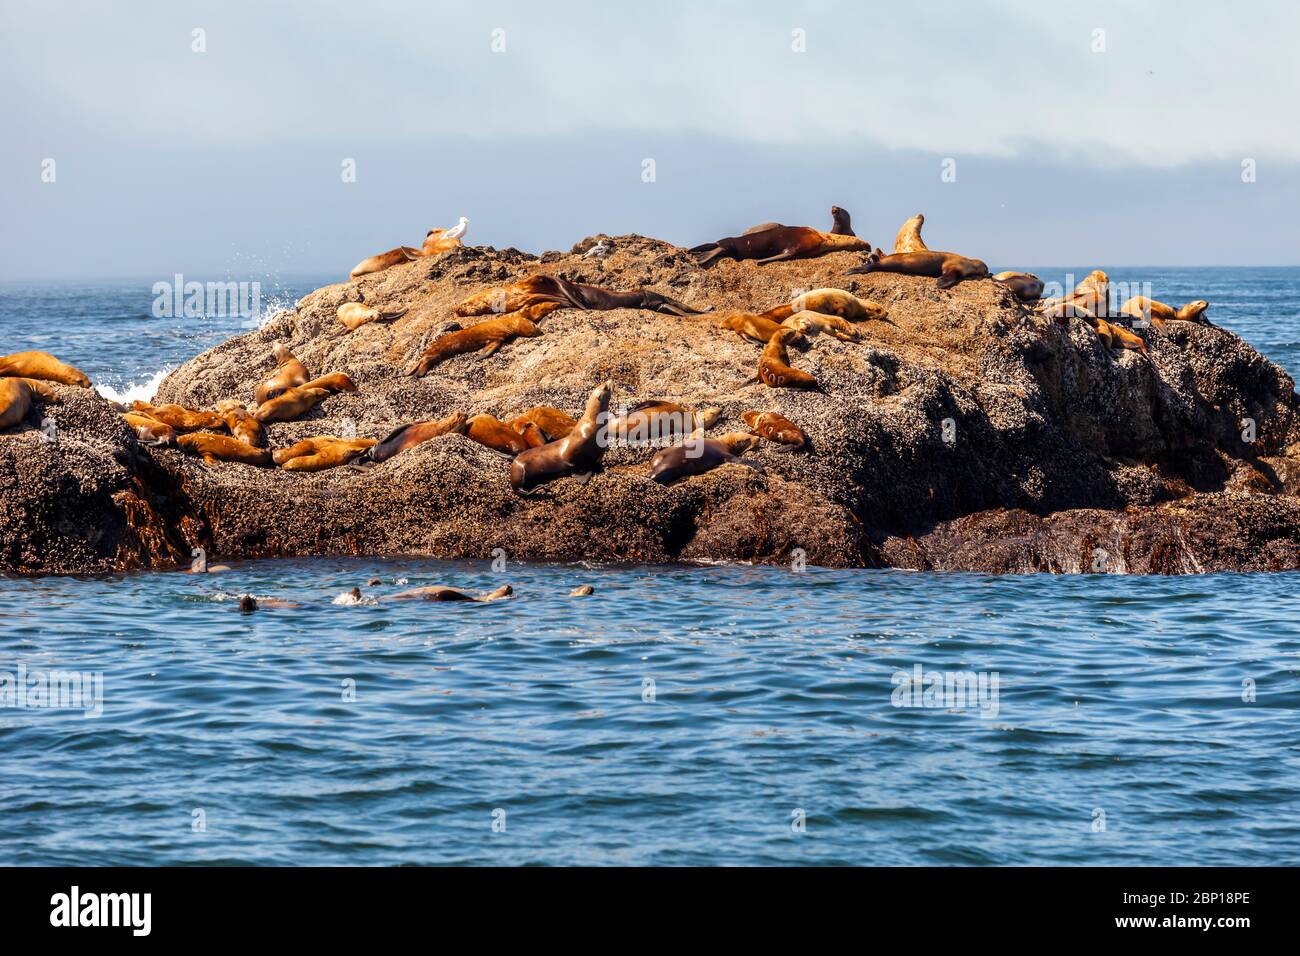 Sea Lions resting on a rock in the ocean at Ucluelet, Canada Stock Photo